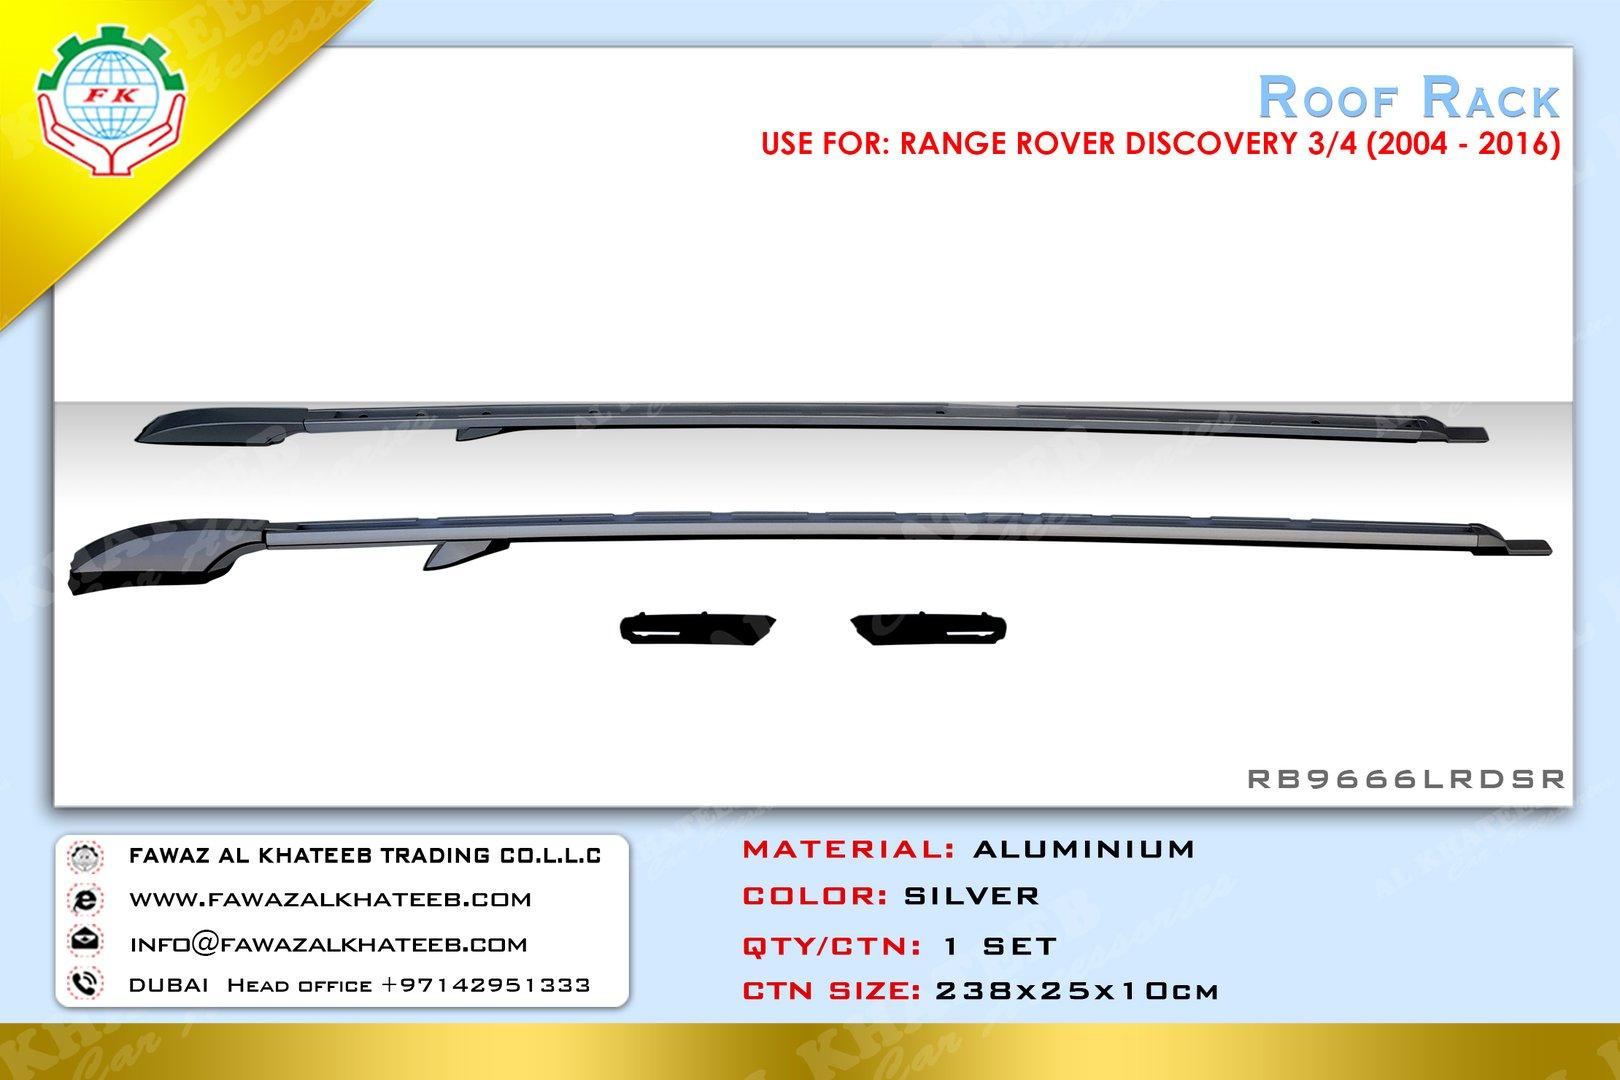 ROOF RACK USE4 RR DISCOVERY 2006-16-RB9666LRDSR